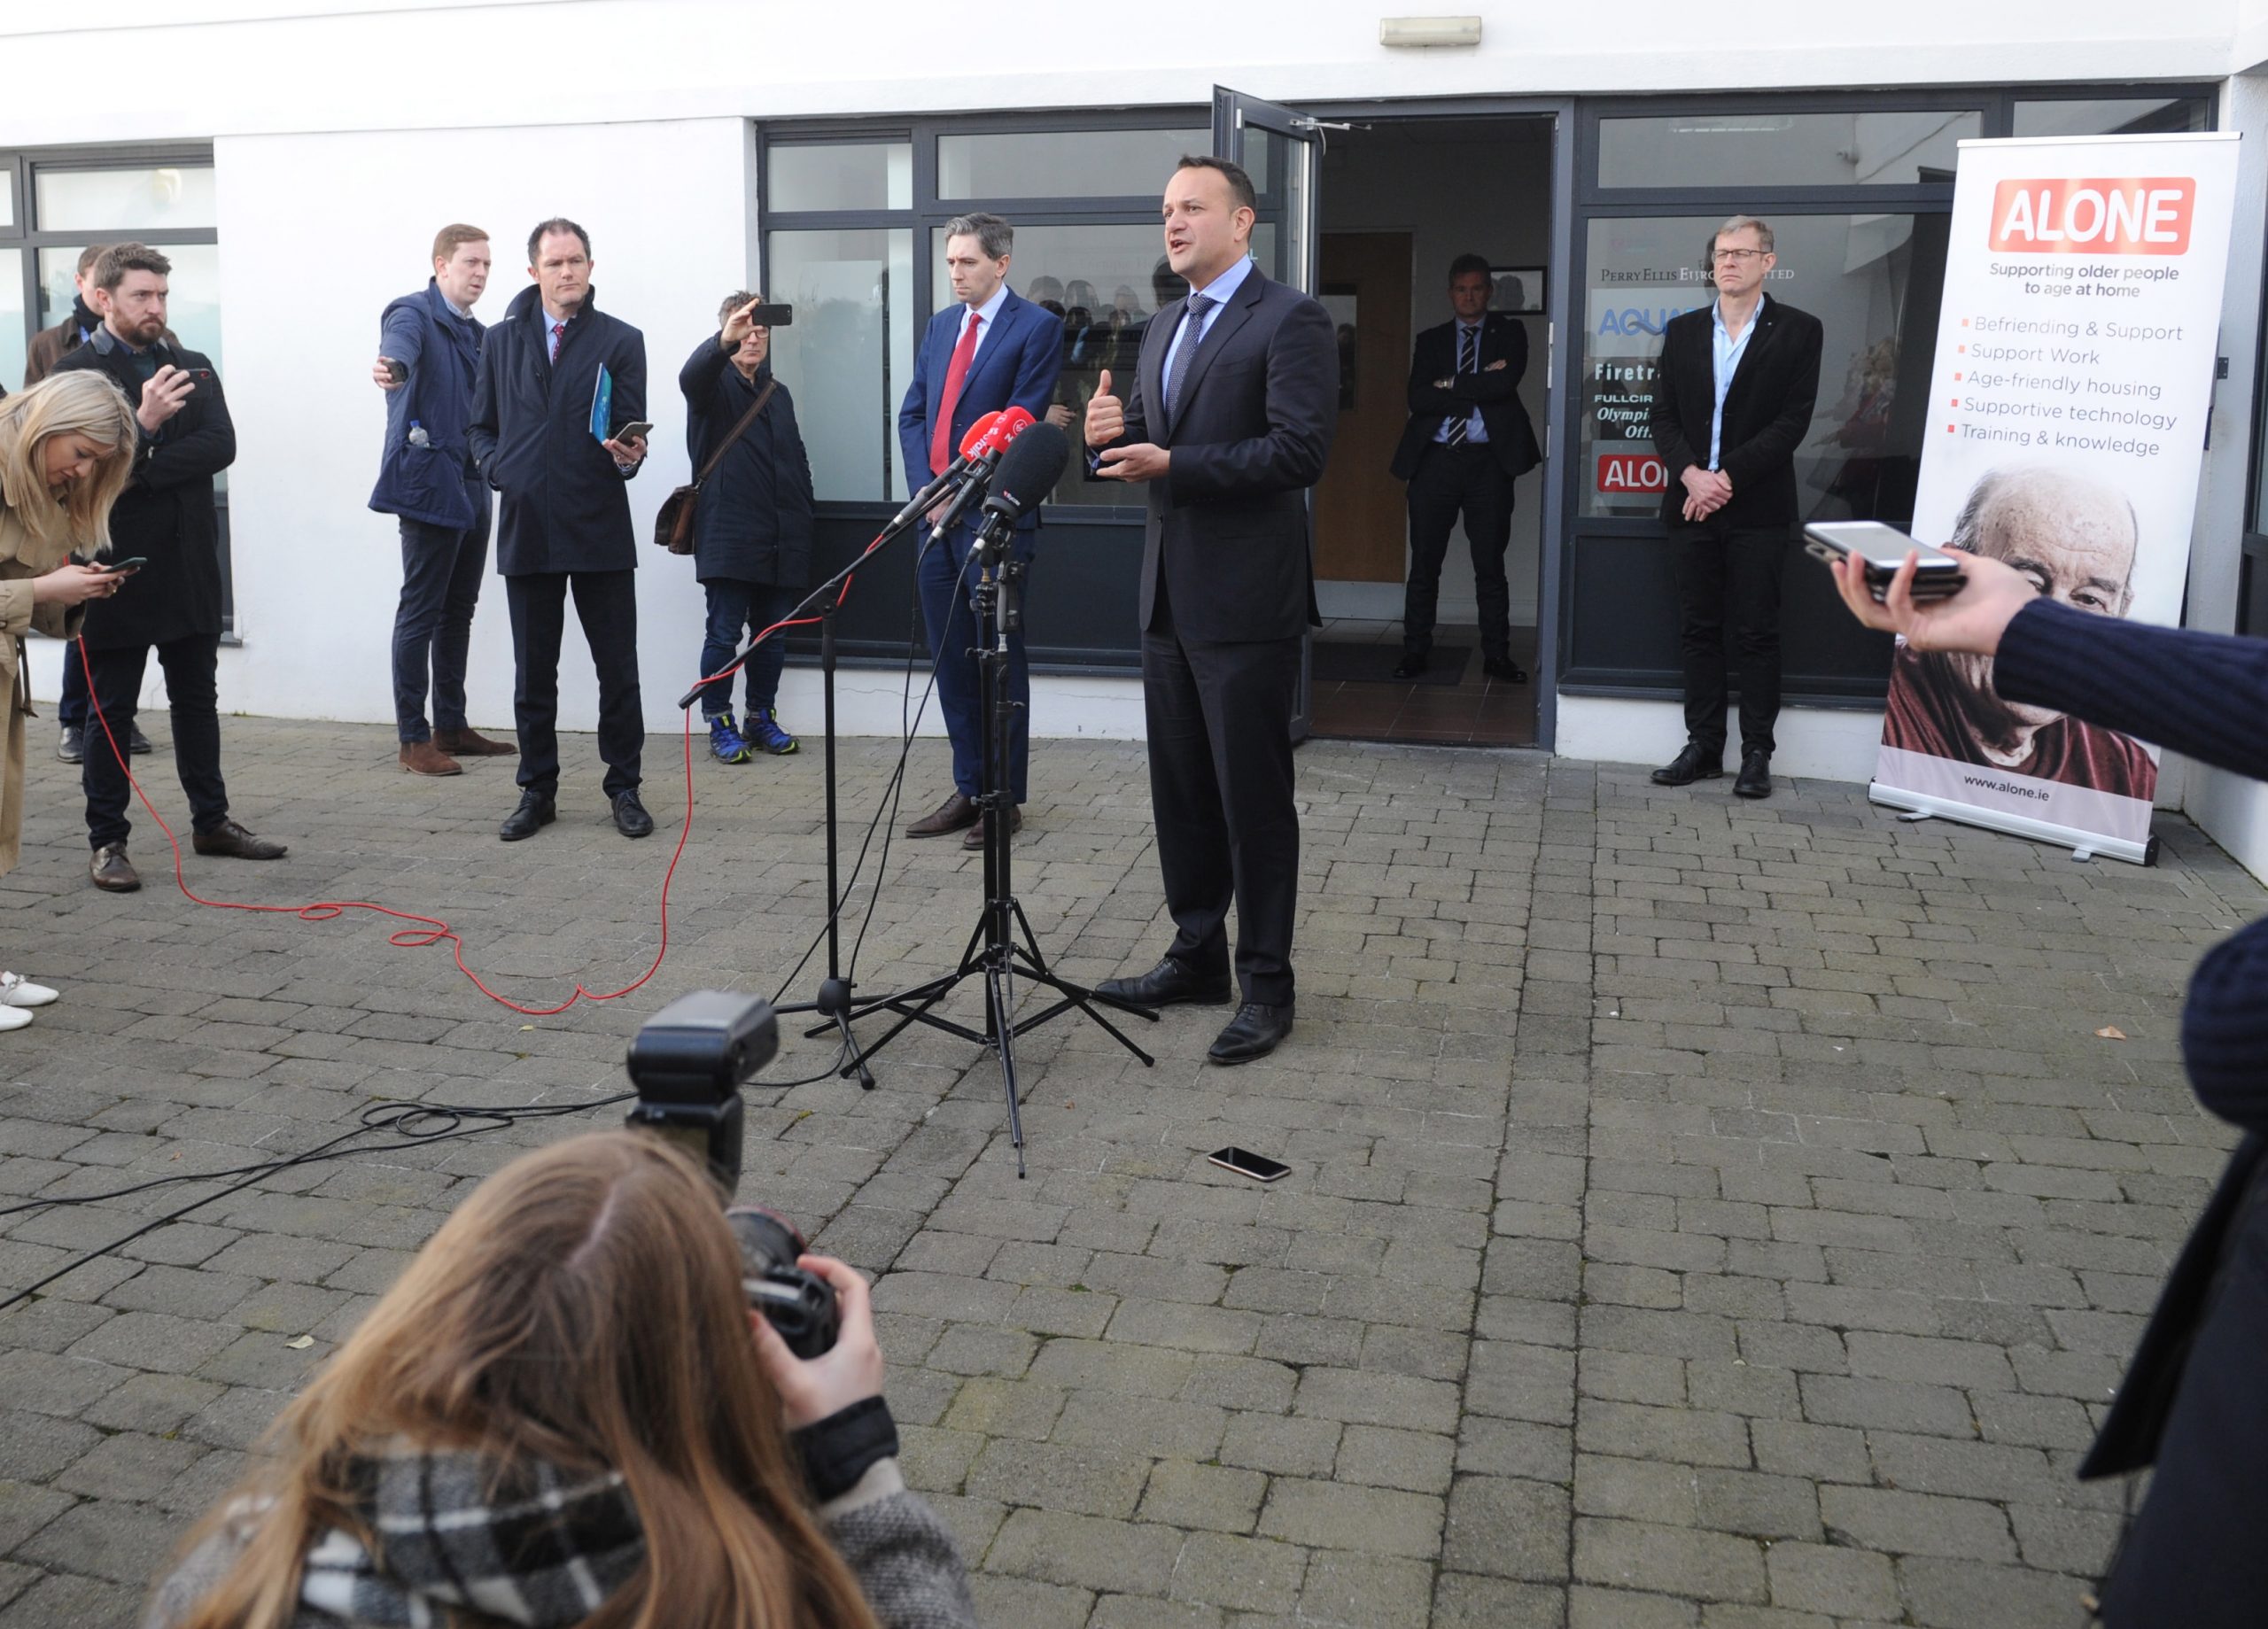 epa08315897 Journalists observe social distancing while Irish Prime Minister (An Taoiseach) Leo Varadkar (C) speaks to them in Dublin City in Dublin City, Ireland, 23 March 2020.   Ireland currenty has approximately 1,000 cases of Covid-19 and  is opening up to 50 test centres around the country.  EPA/AIDAN CRAWLEY